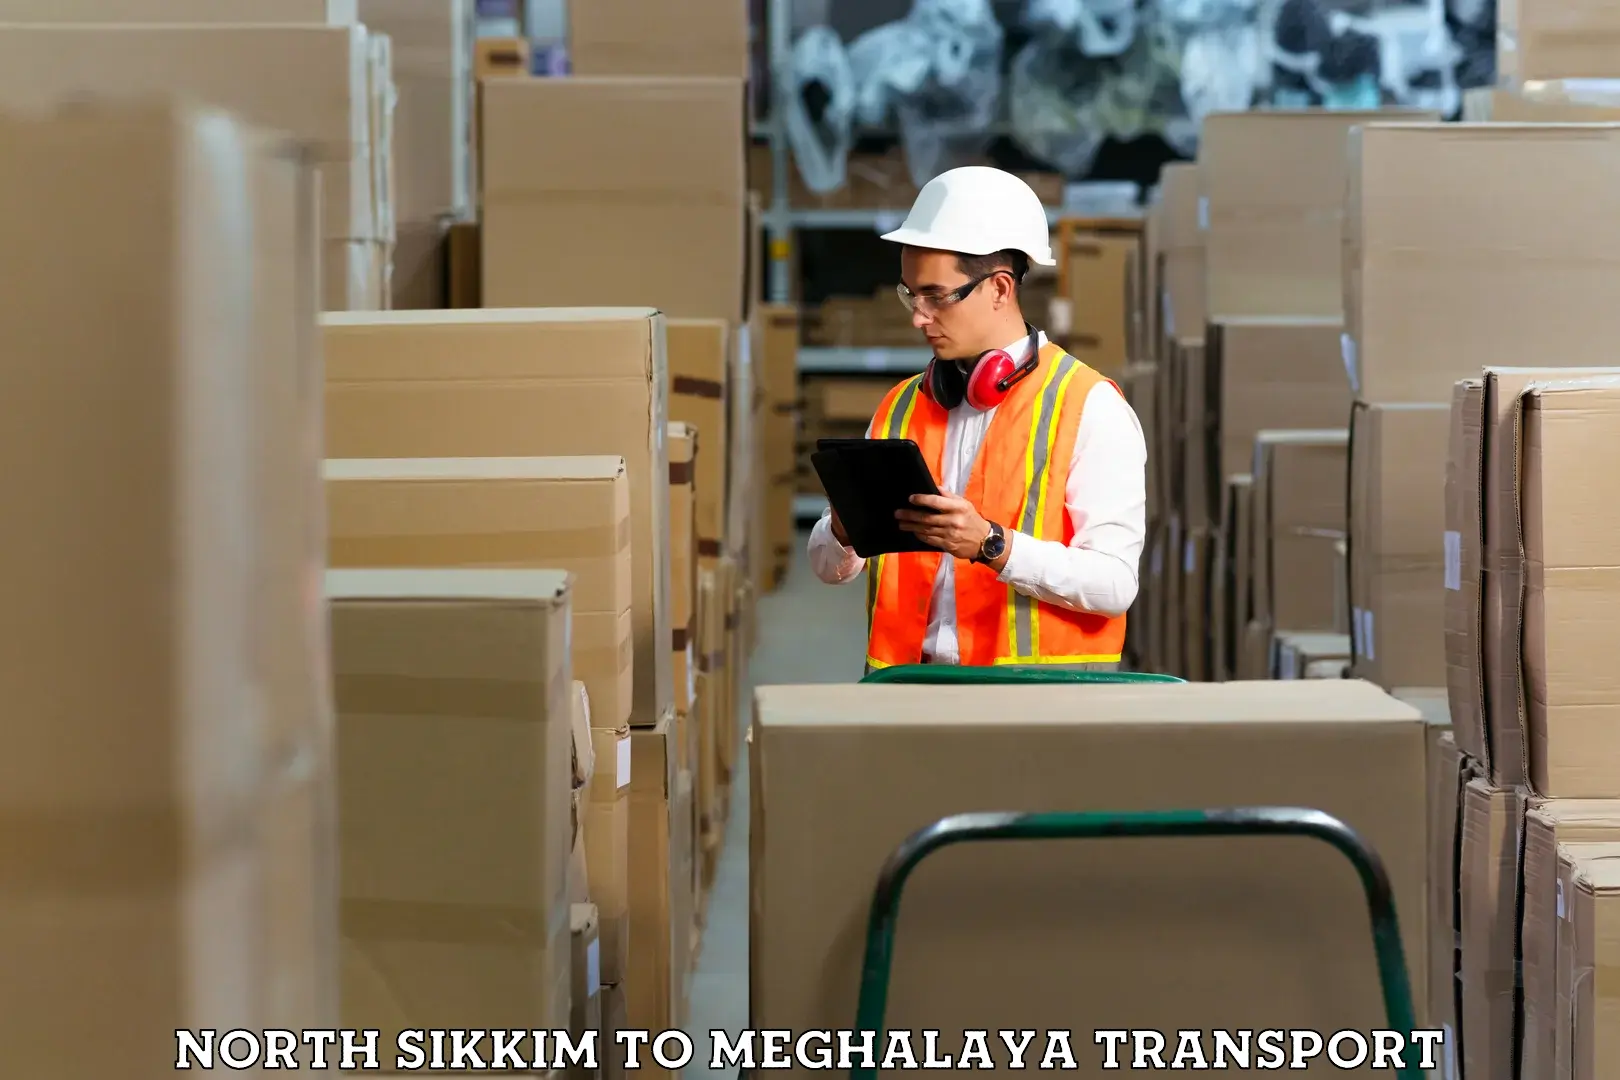 Container transport service North Sikkim to Meghalaya